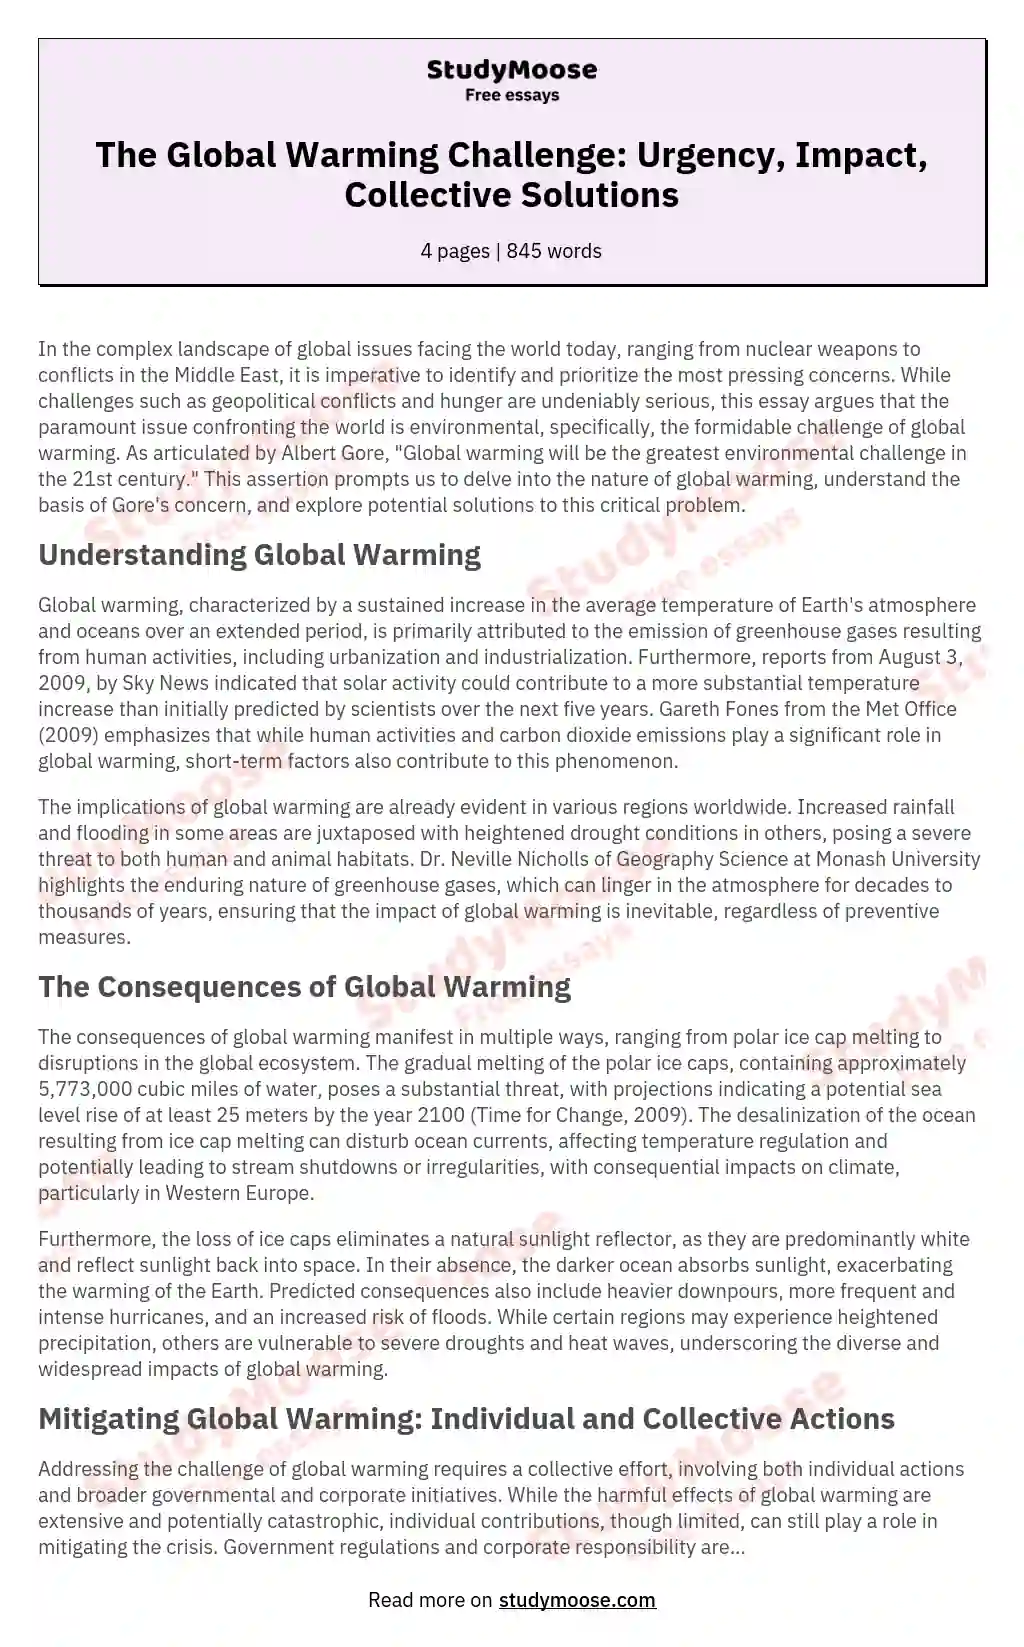 The Global Warming Challenge: Urgency, Impact, Collective Solutions essay